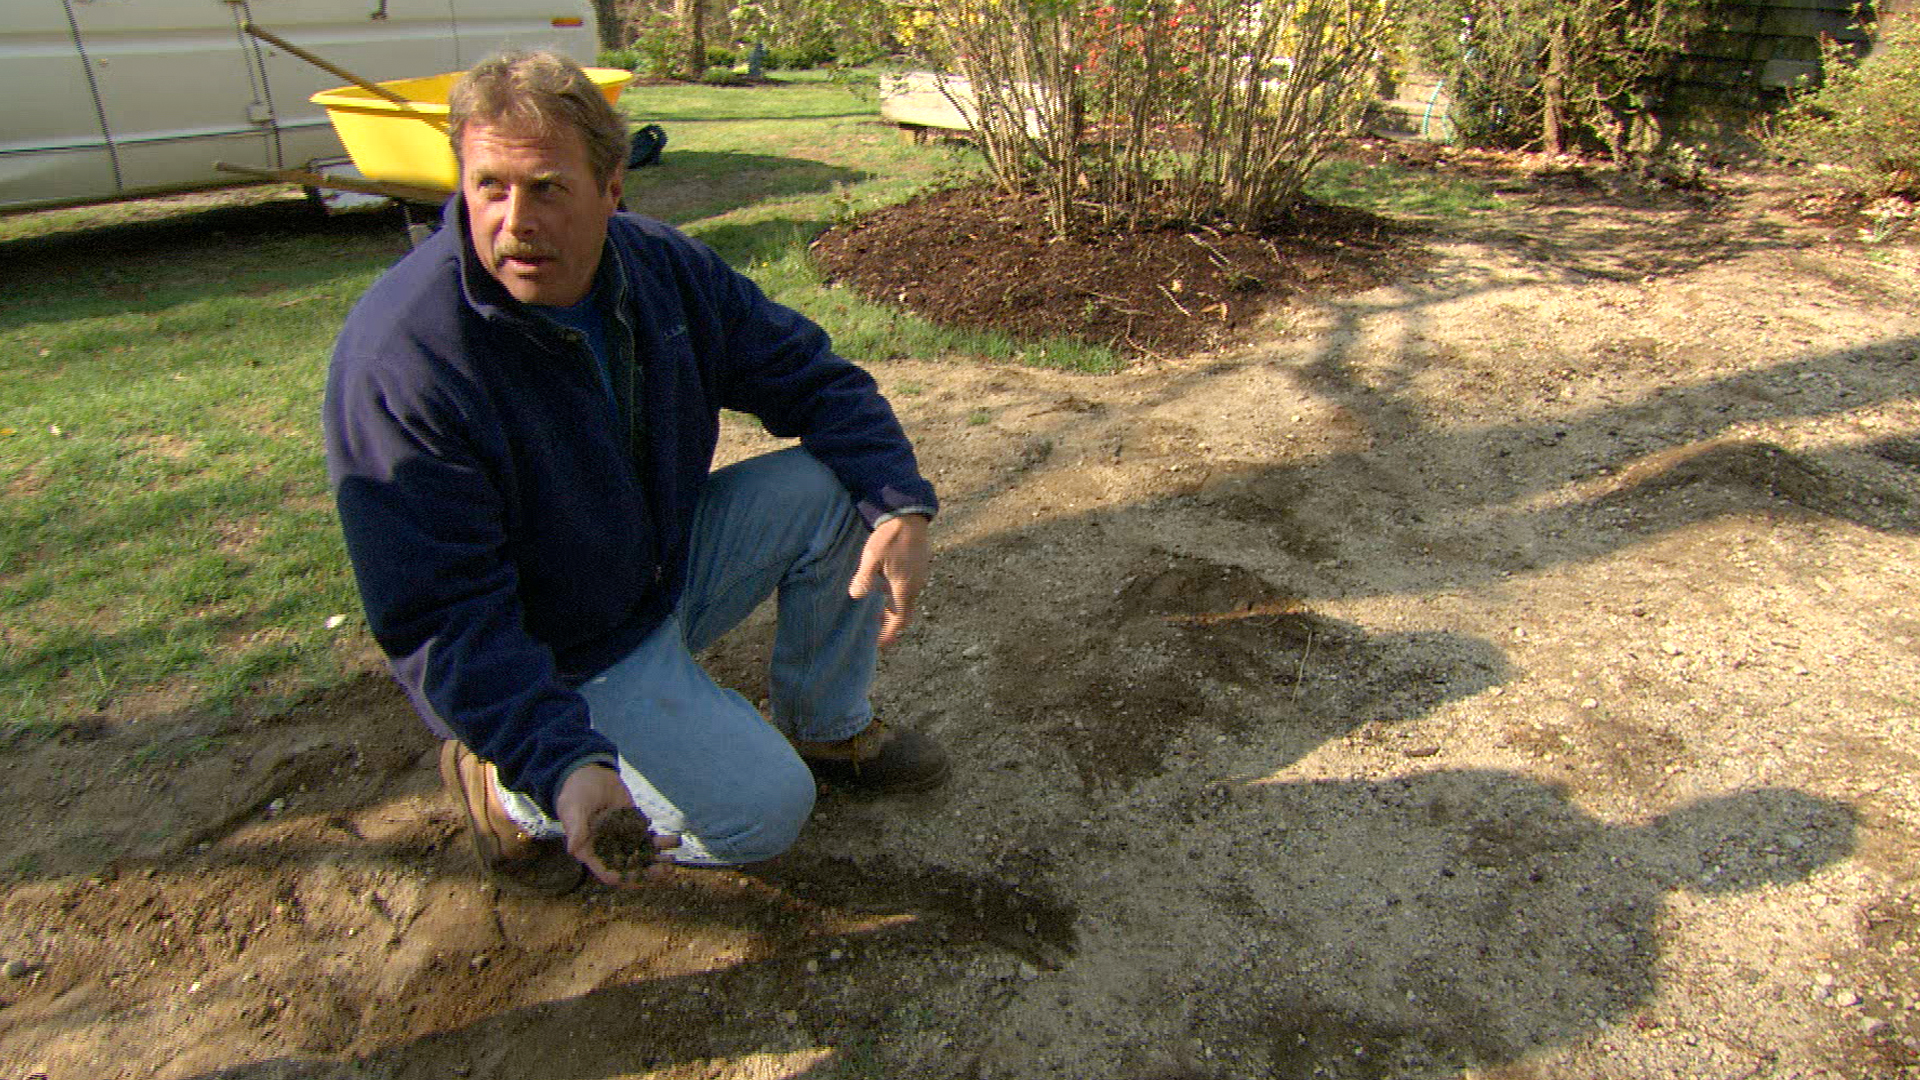 ASK S7 E4, Roger Cook repairs a construction-damaged lawn